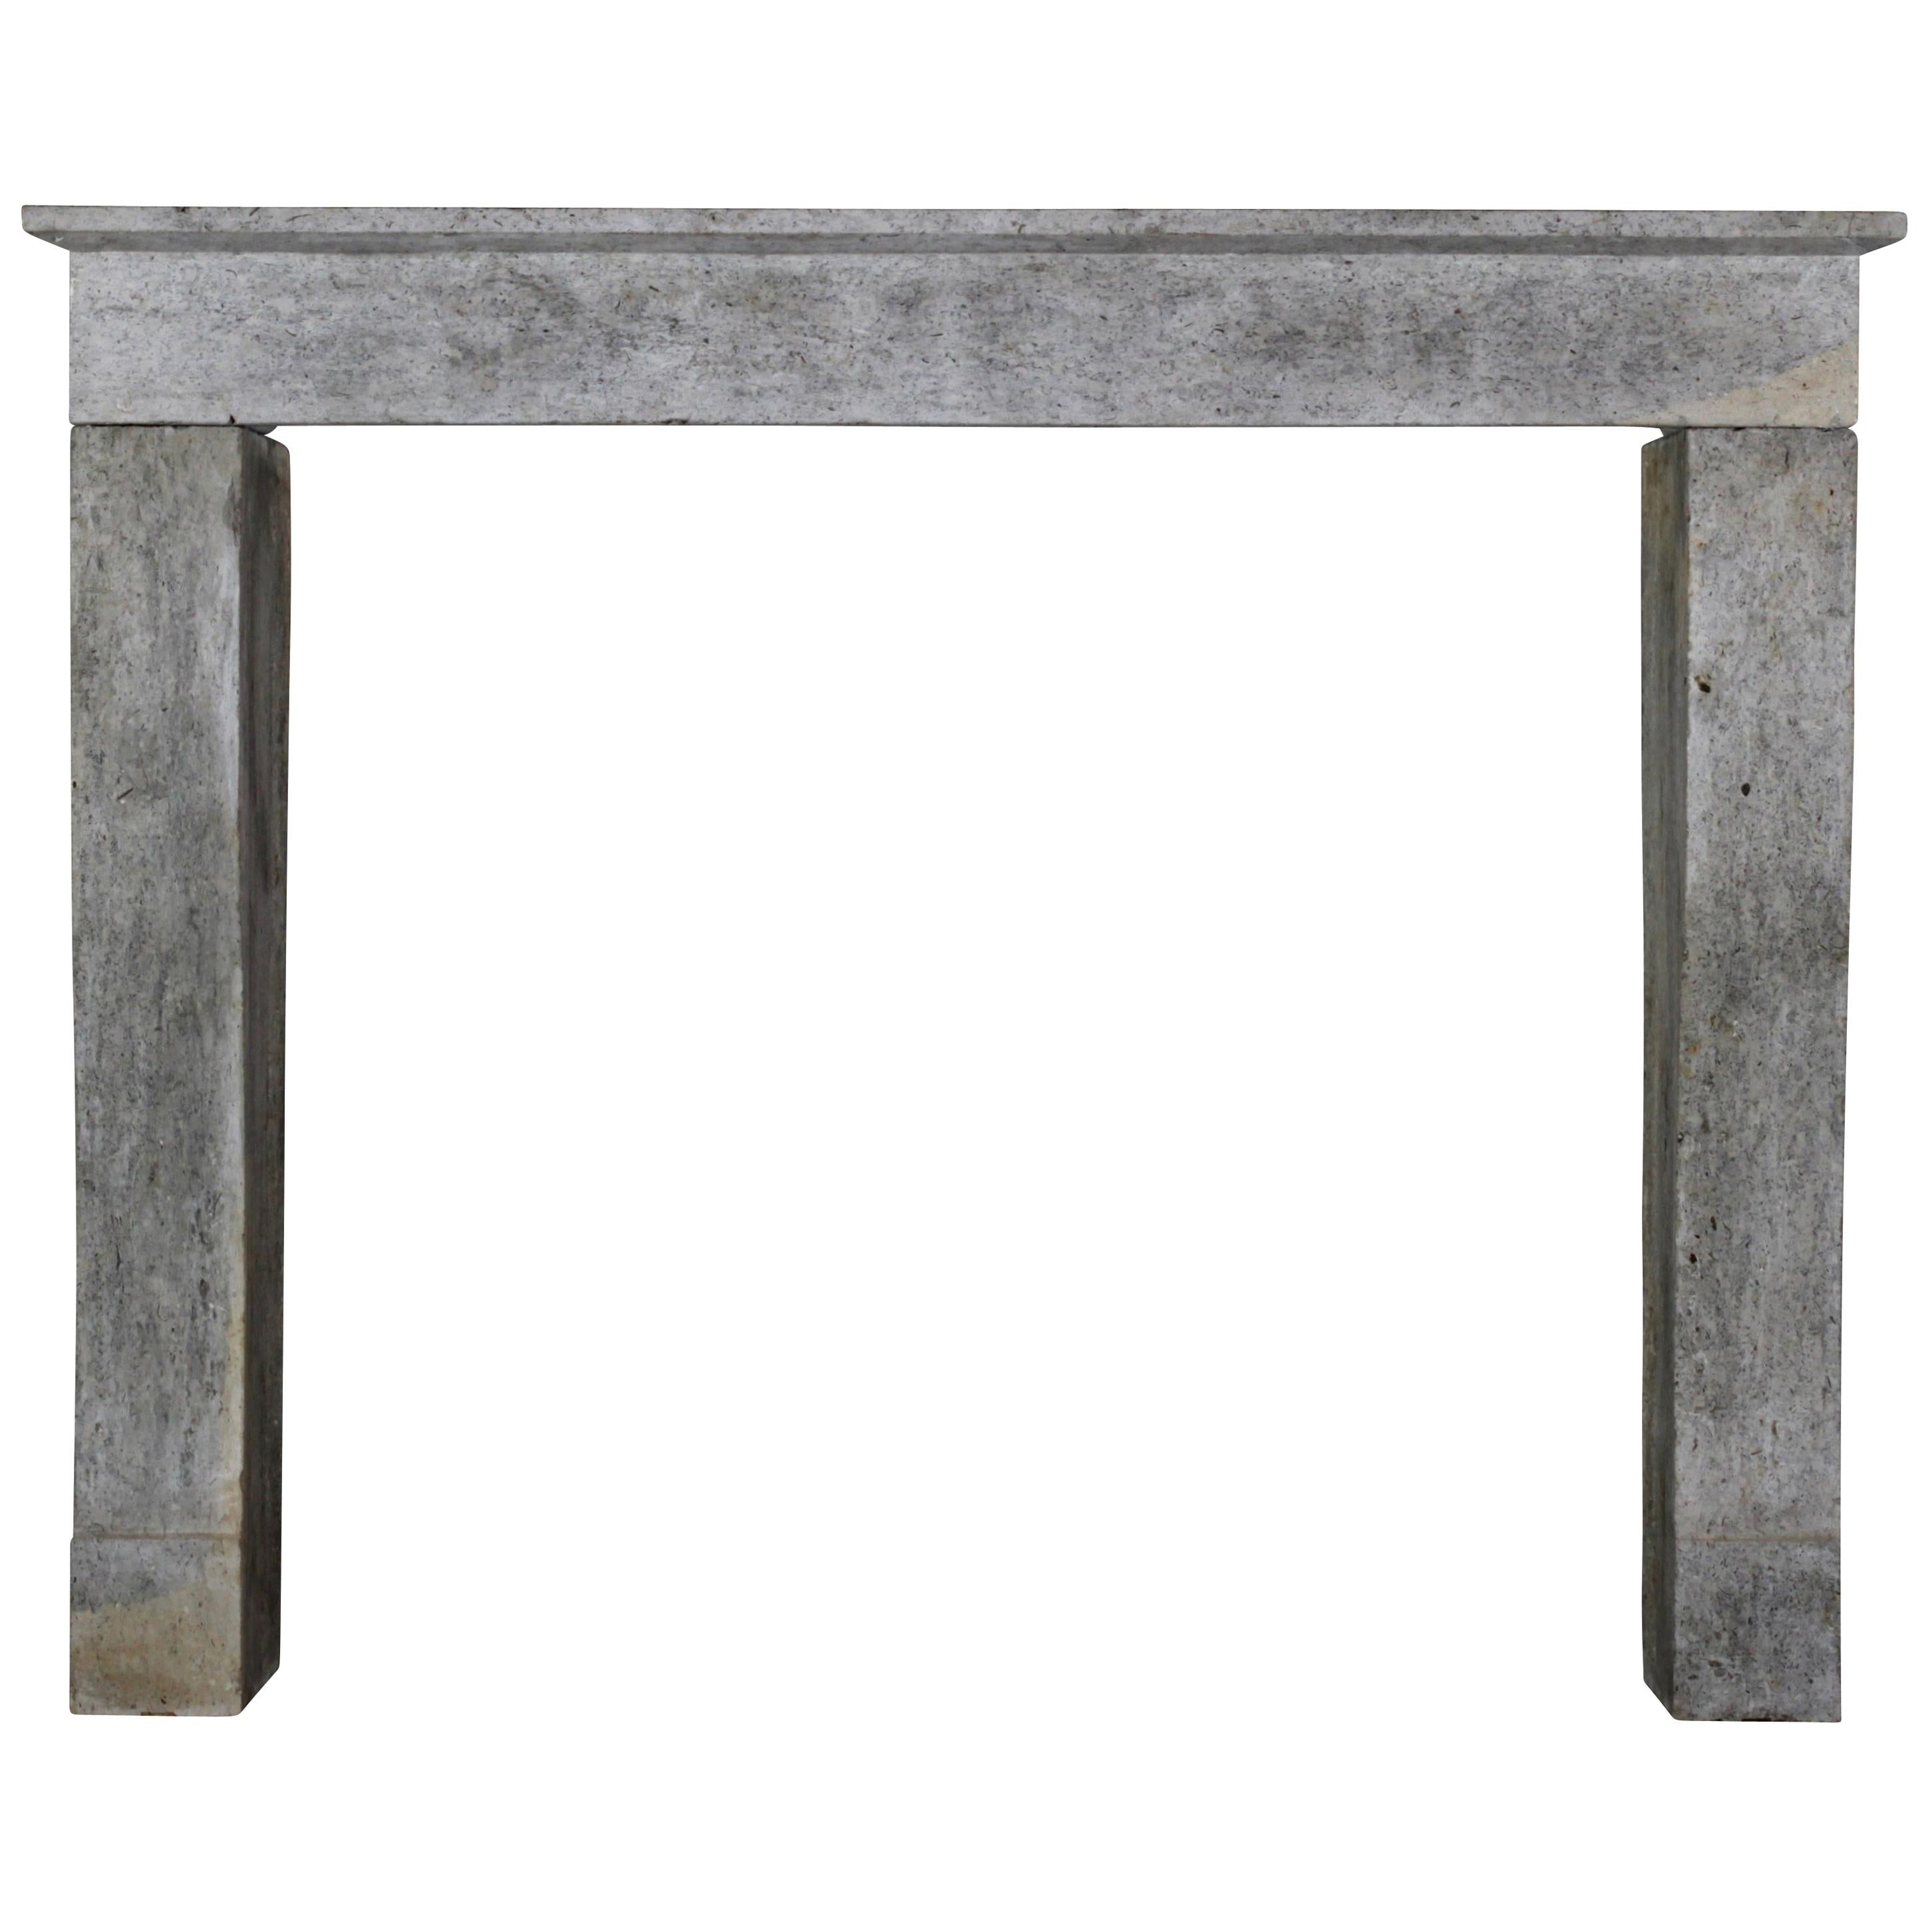 Fine French Vintage Grey Stone Fireplace Surround For Timeless Classy Interior